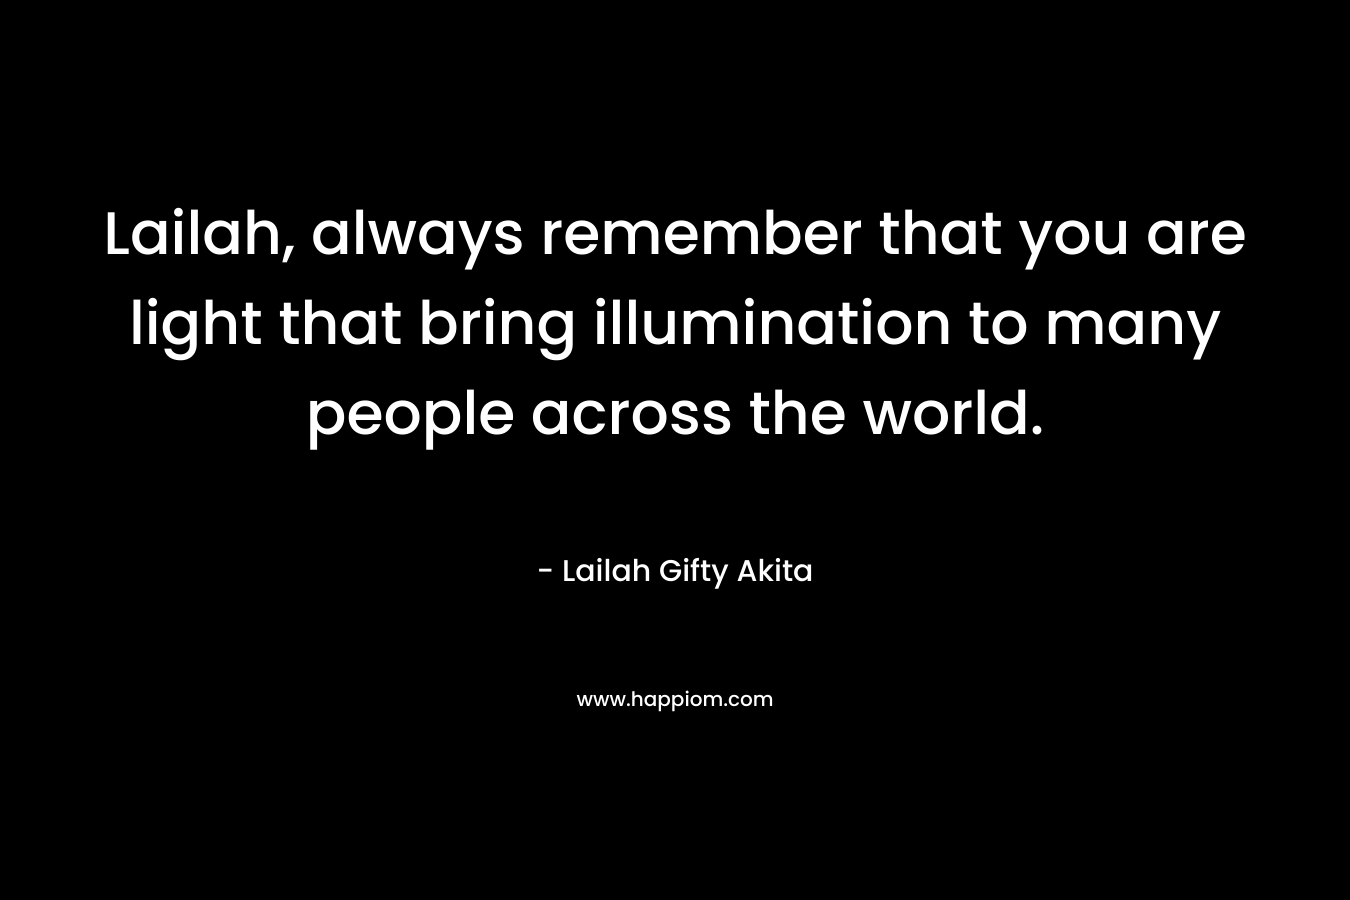 Lailah, always remember that you are light that bring illumination to many people across the world.